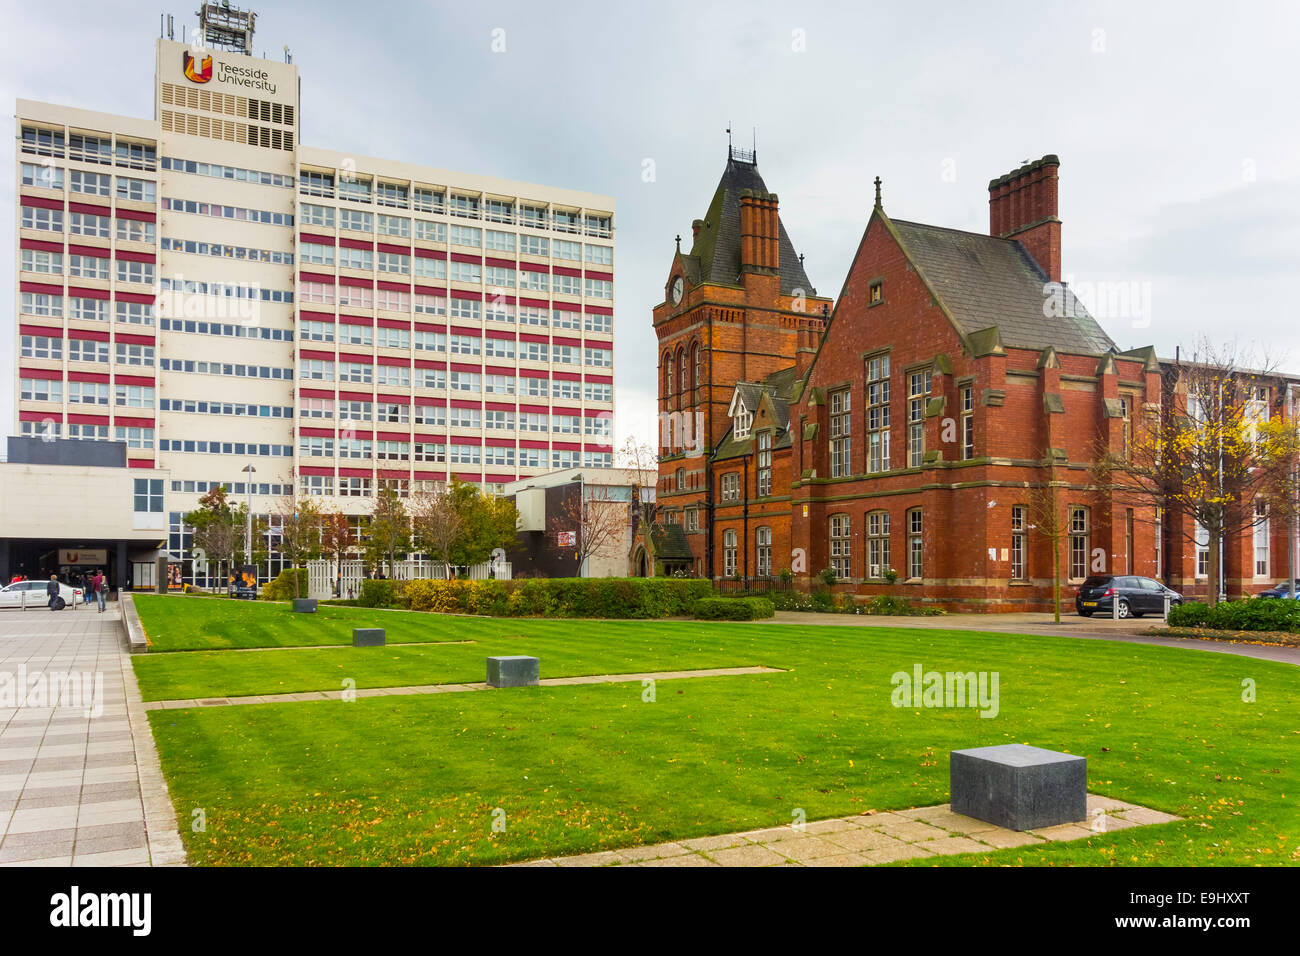 University of Teesside campus and buildings in Middlesbrough England UK Stock Photo